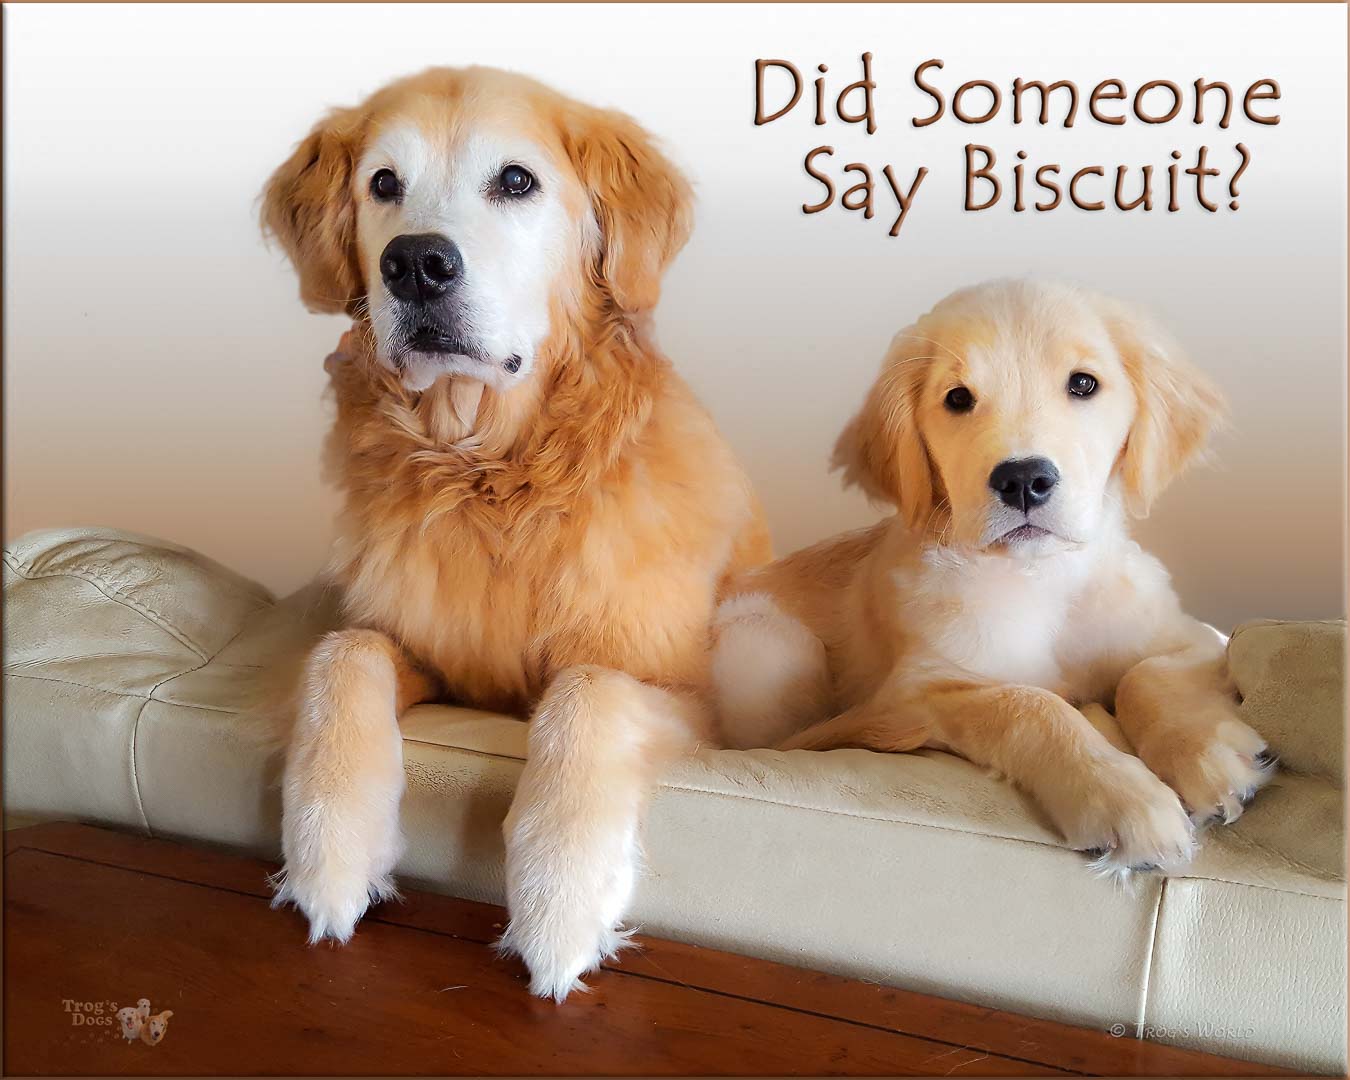 Two golden retrievers waiting for a biscuit